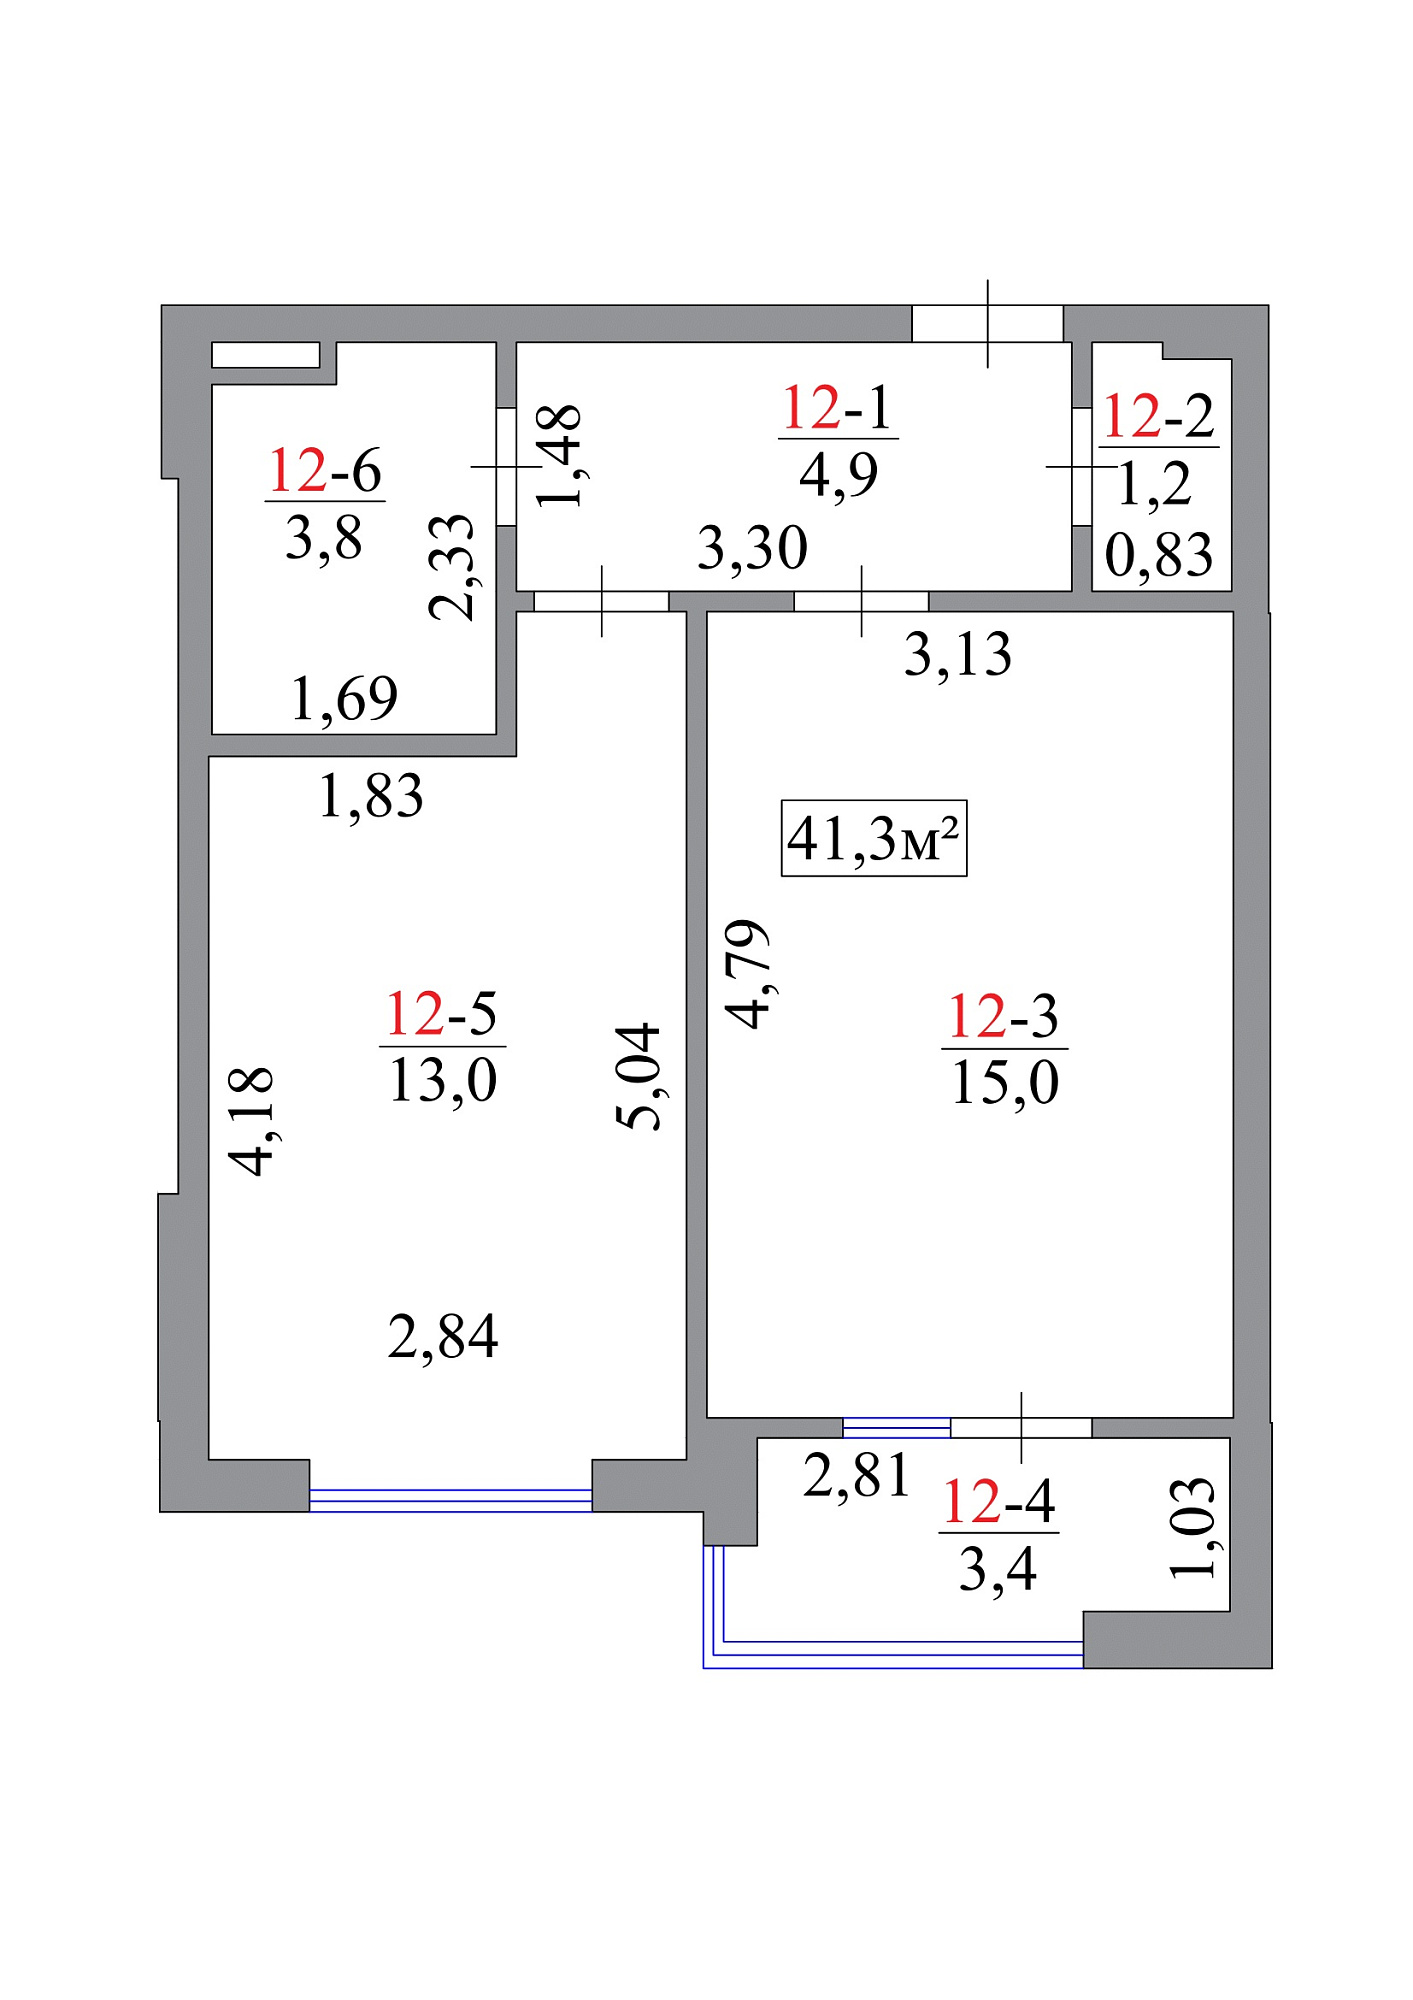 Planning 1-rm flats area 41.3m2, AB-07-02/00011.